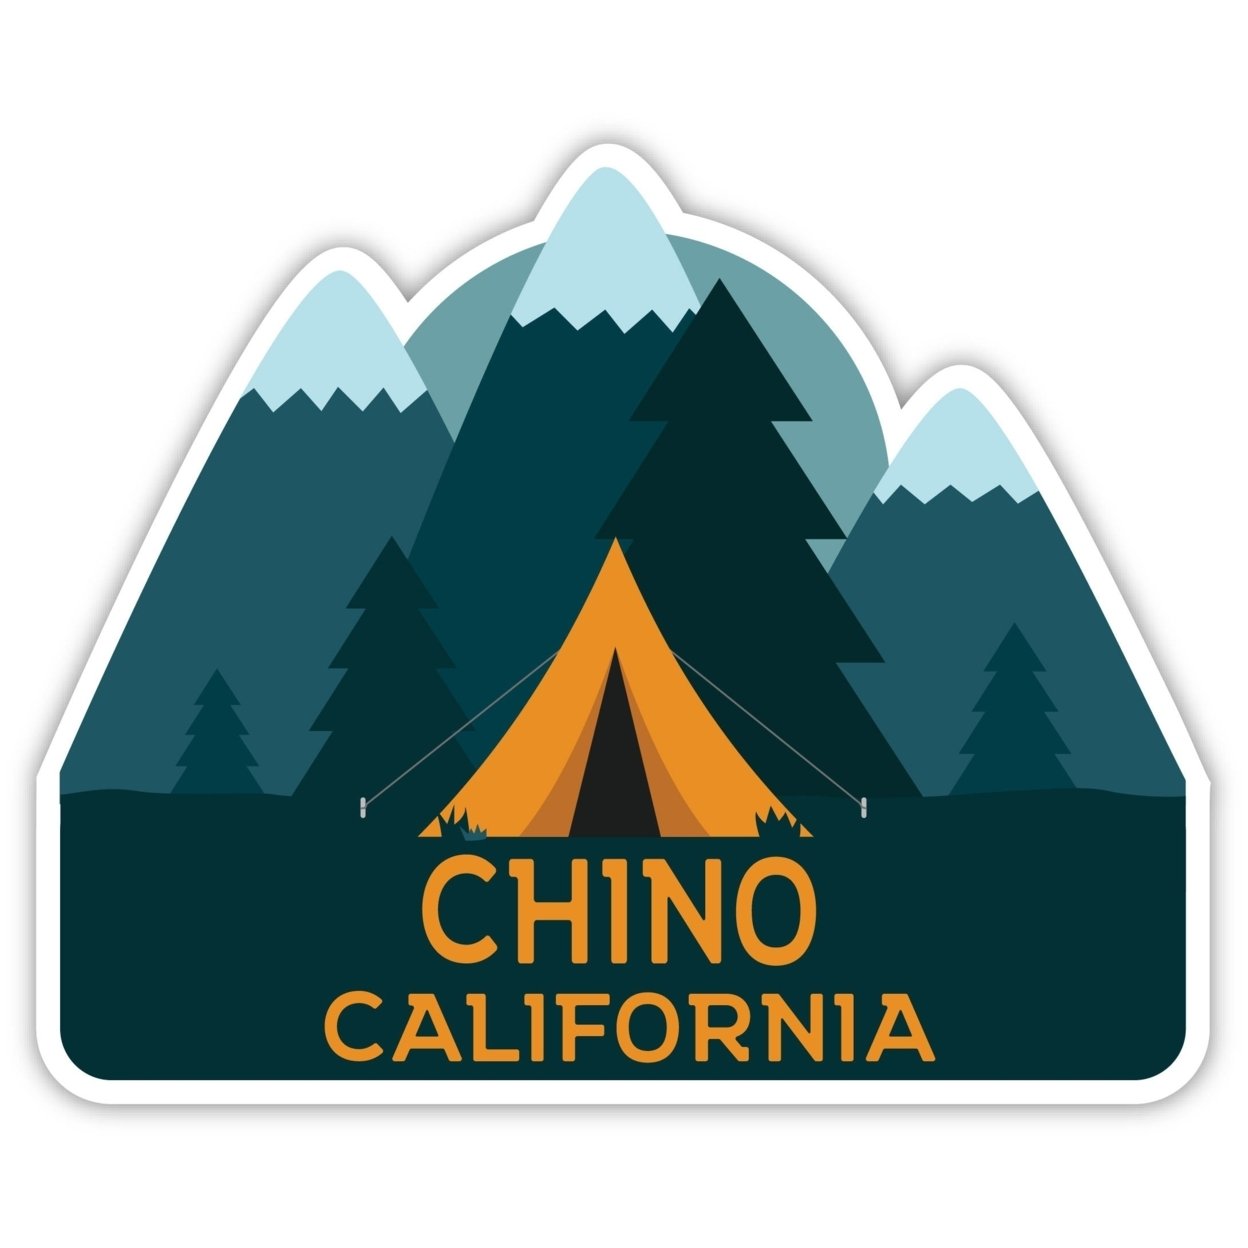 Chino California Souvenir Decorative Stickers (Choose Theme And Size) - 4-Pack, 8-Inch, Tent